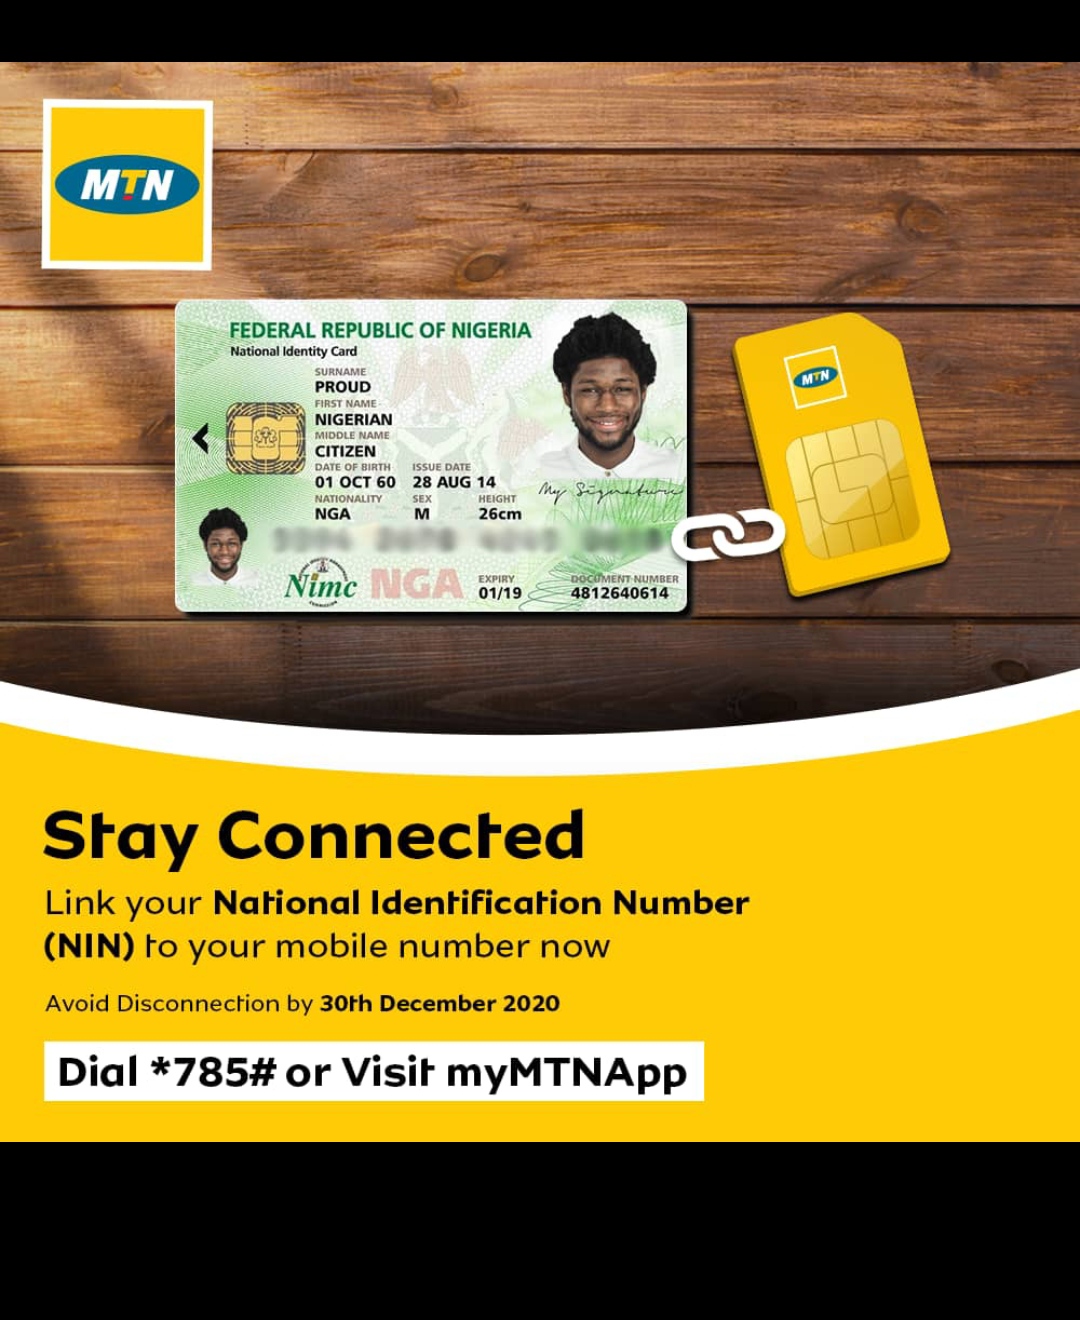 Mtn, glo airtel and 9mobile Simcards nin codes